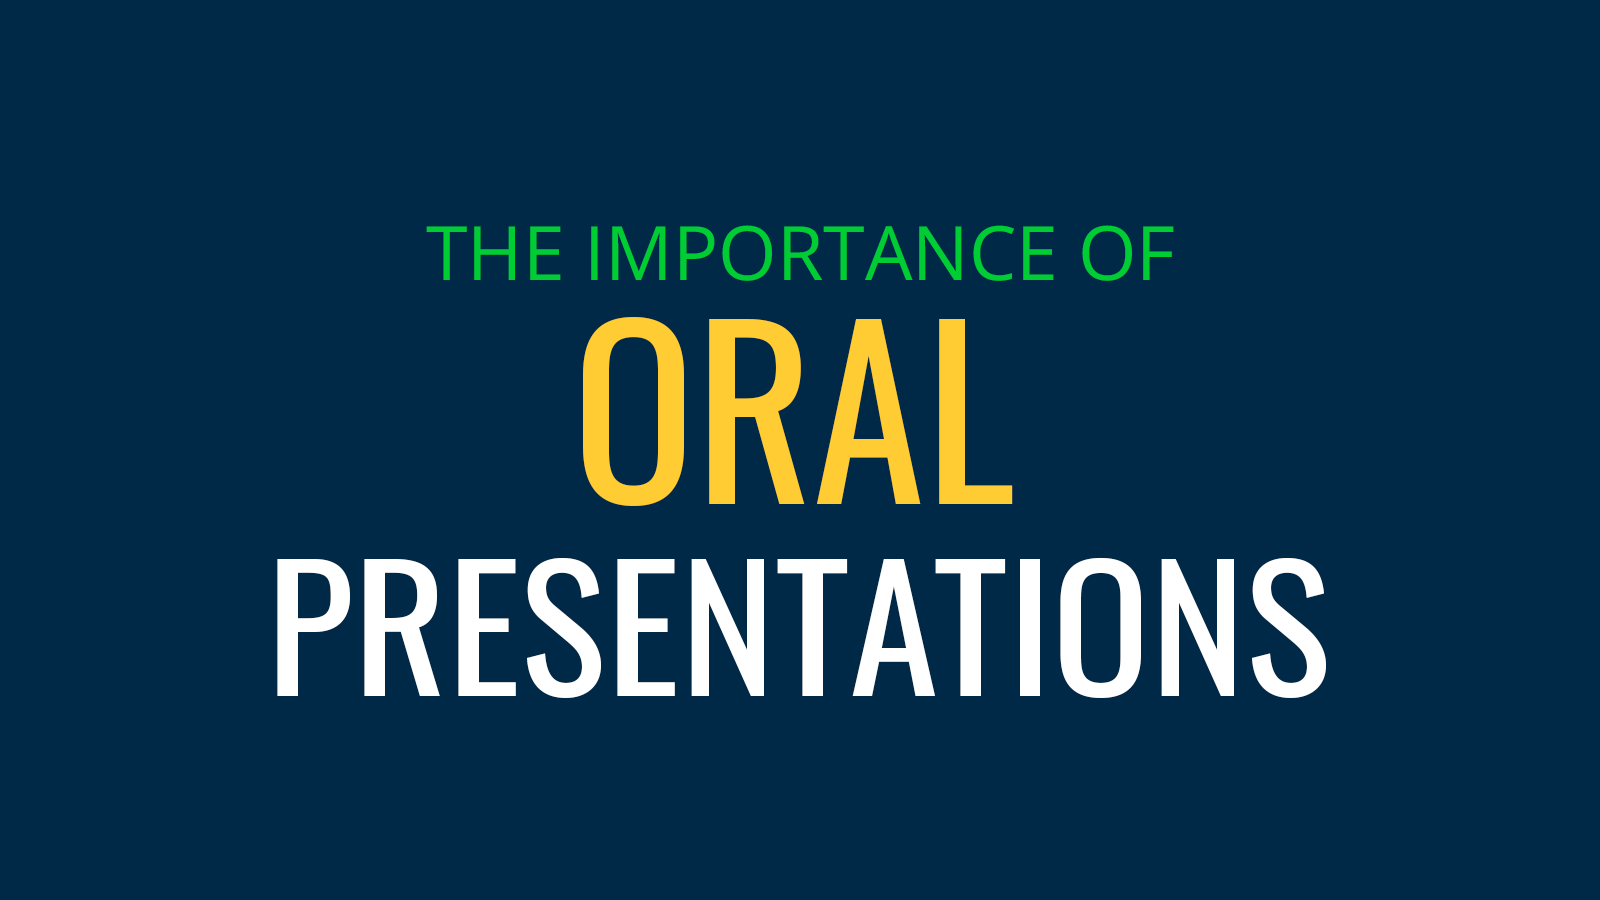 oral presentations can be structured as goodwill messages